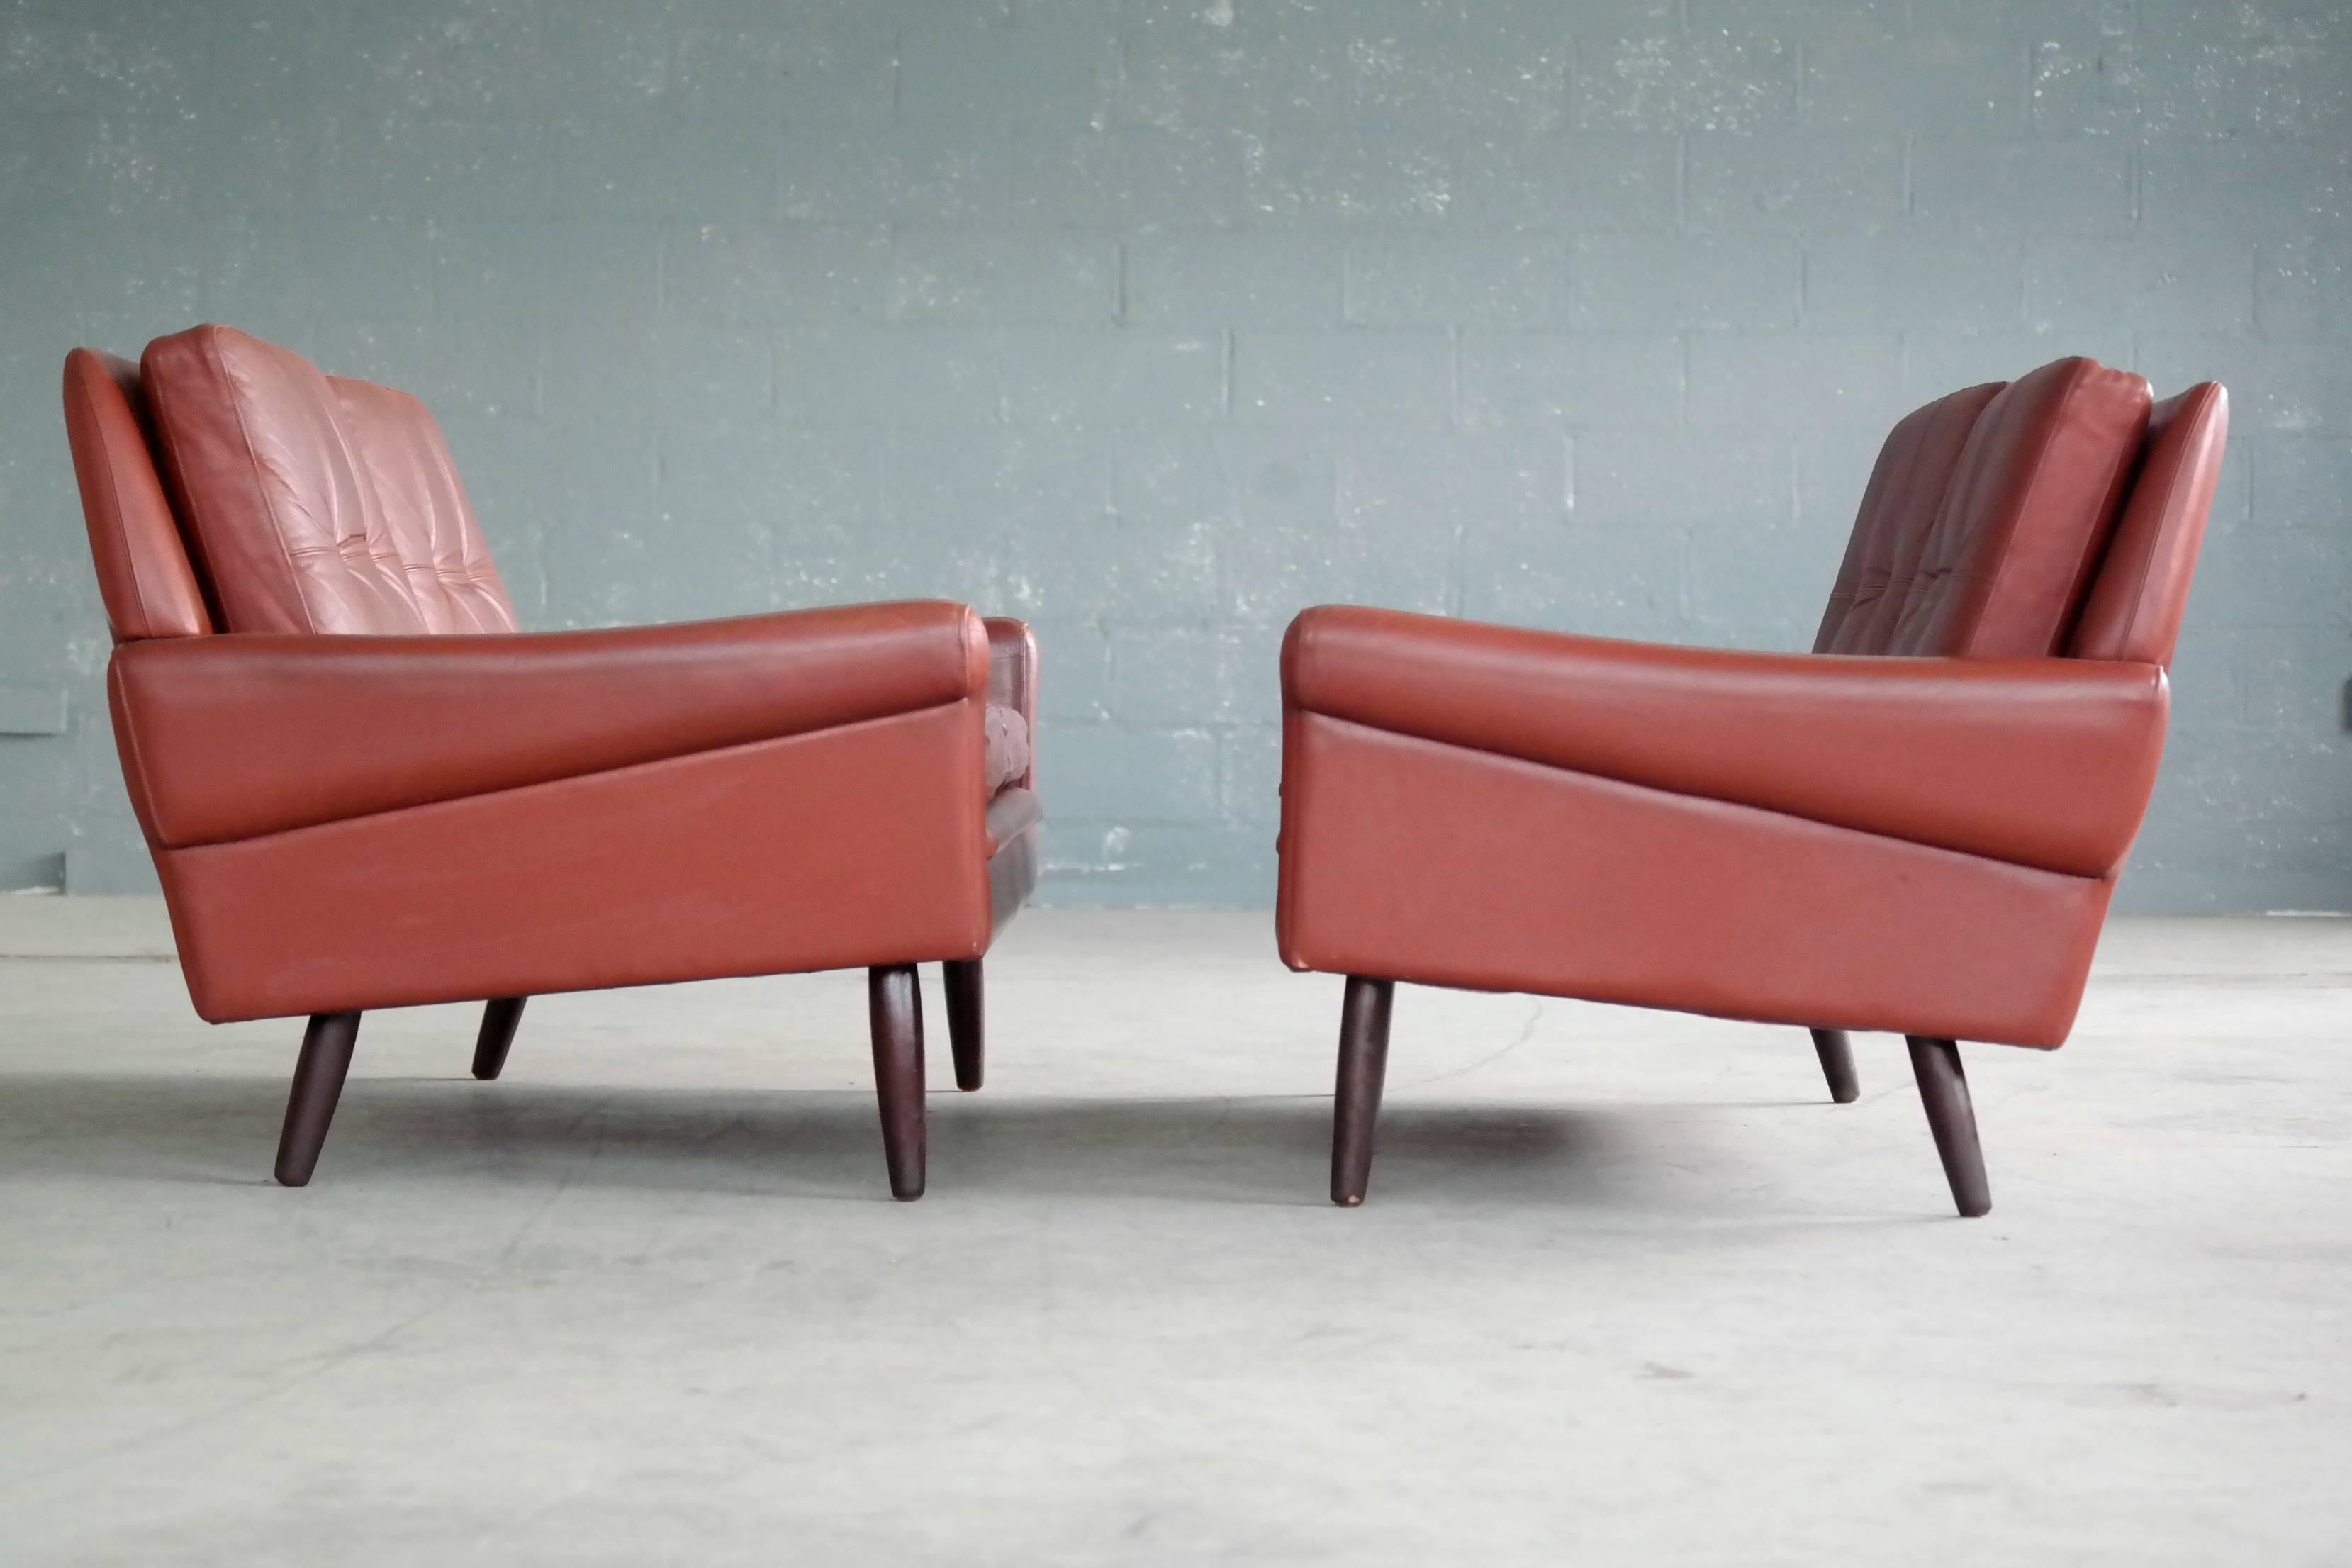 Mid-20th Century Pair of Sven Skipper 1960s Loveseats or Sofas in Reddish Brown Leather and Teak